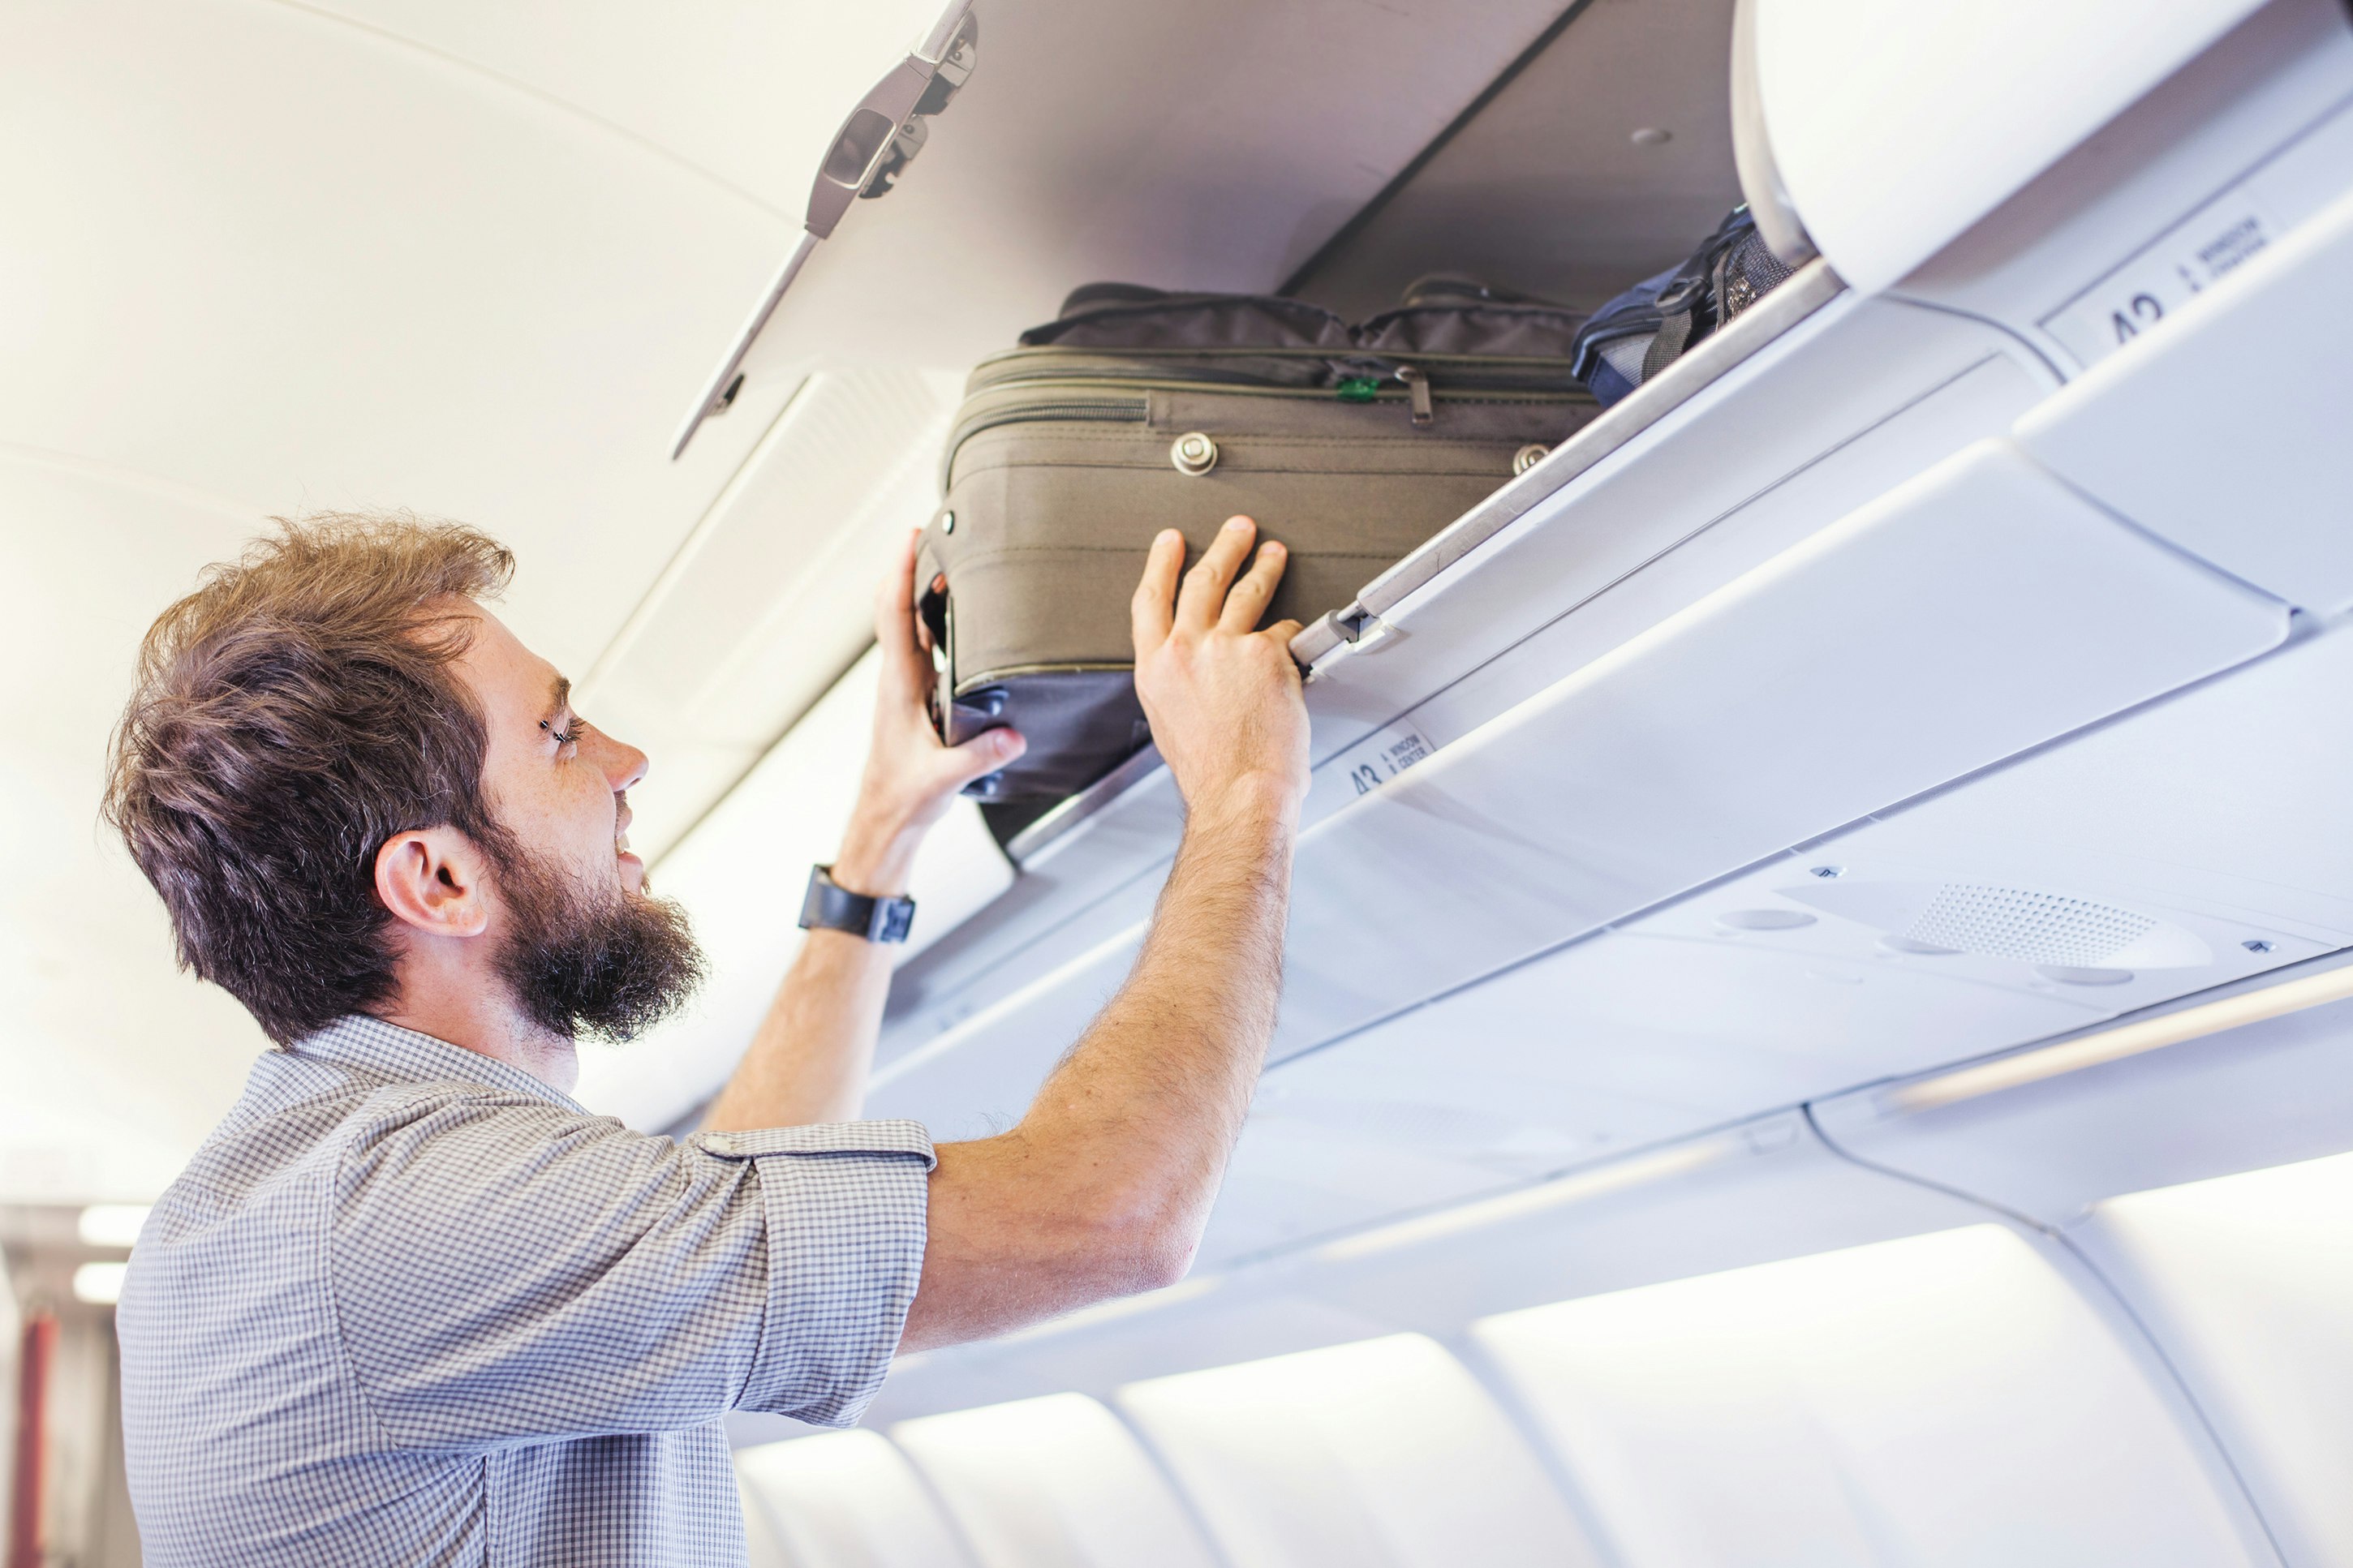 A passenger on a plane is placing his carry-on luggage in an overhead compartment.